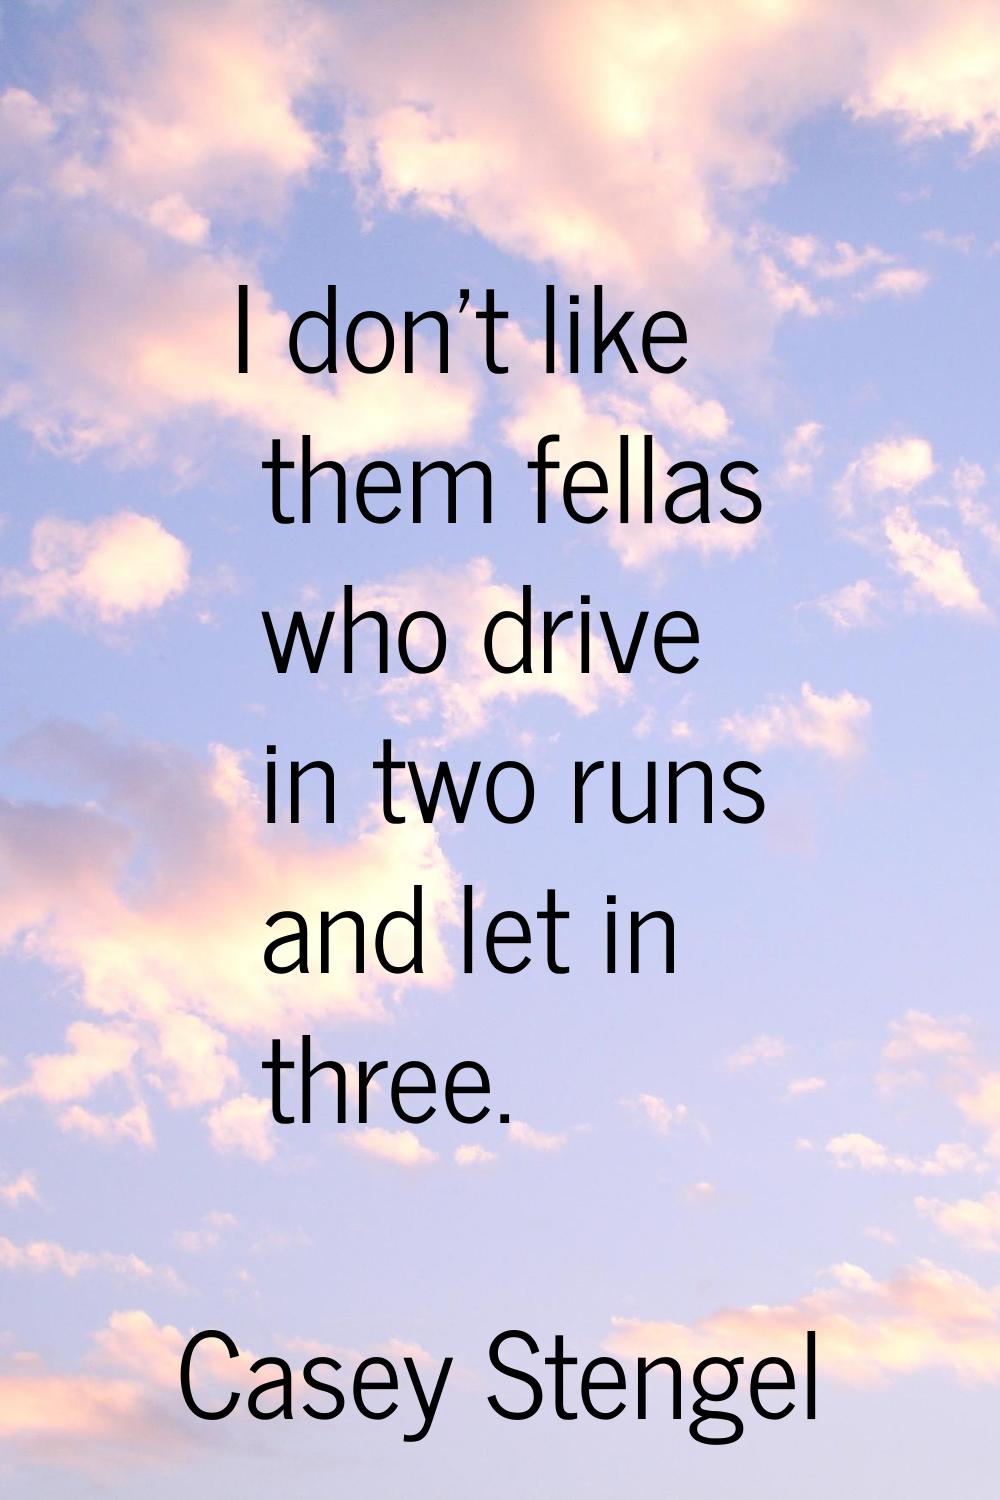 I don't like them fellas who drive in two runs and let in three.